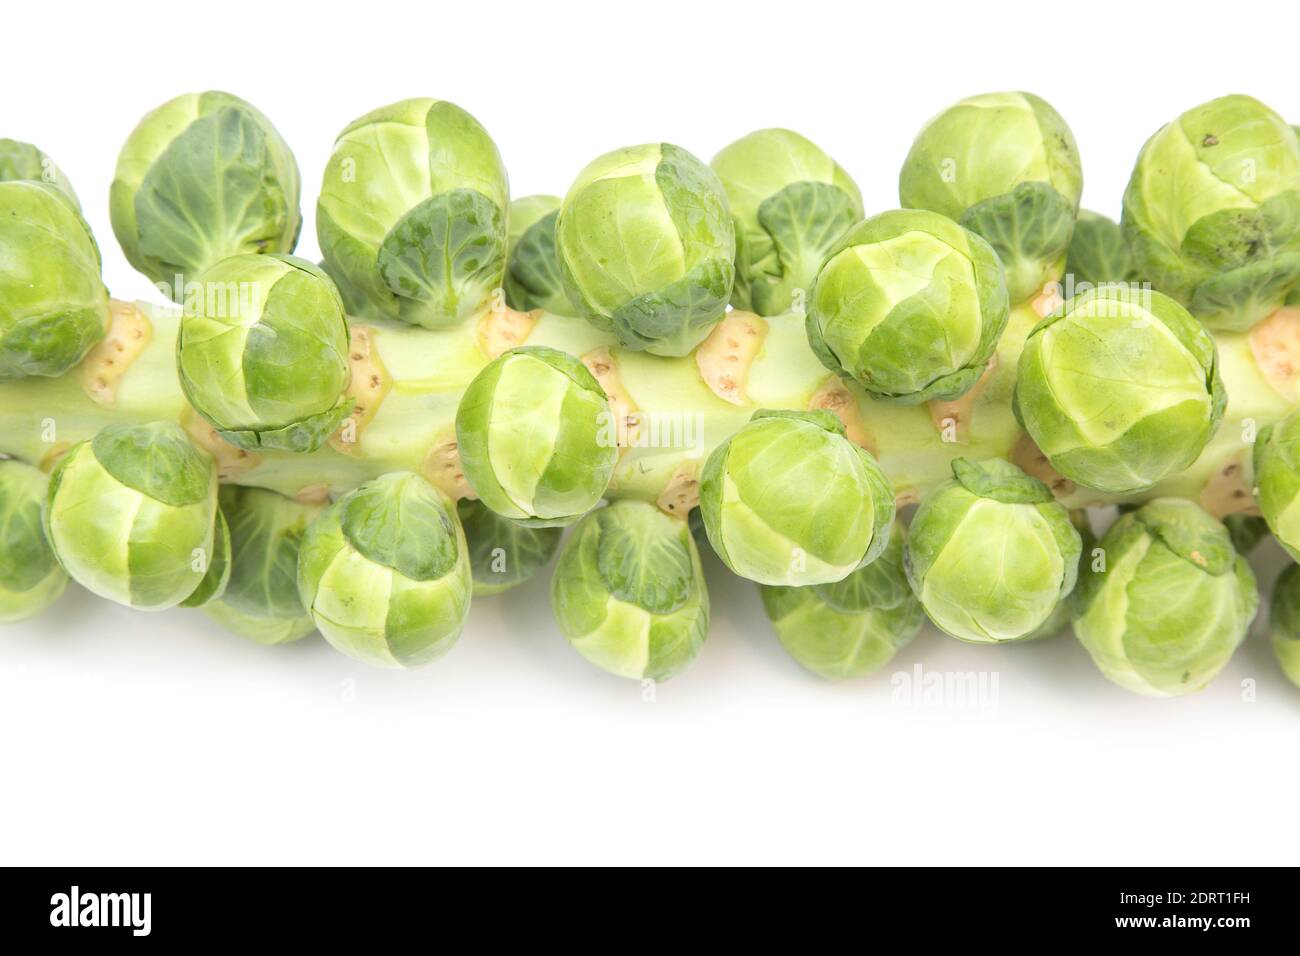 Brussels sprouts on the stem isolated on a white studio background. Stock Photo